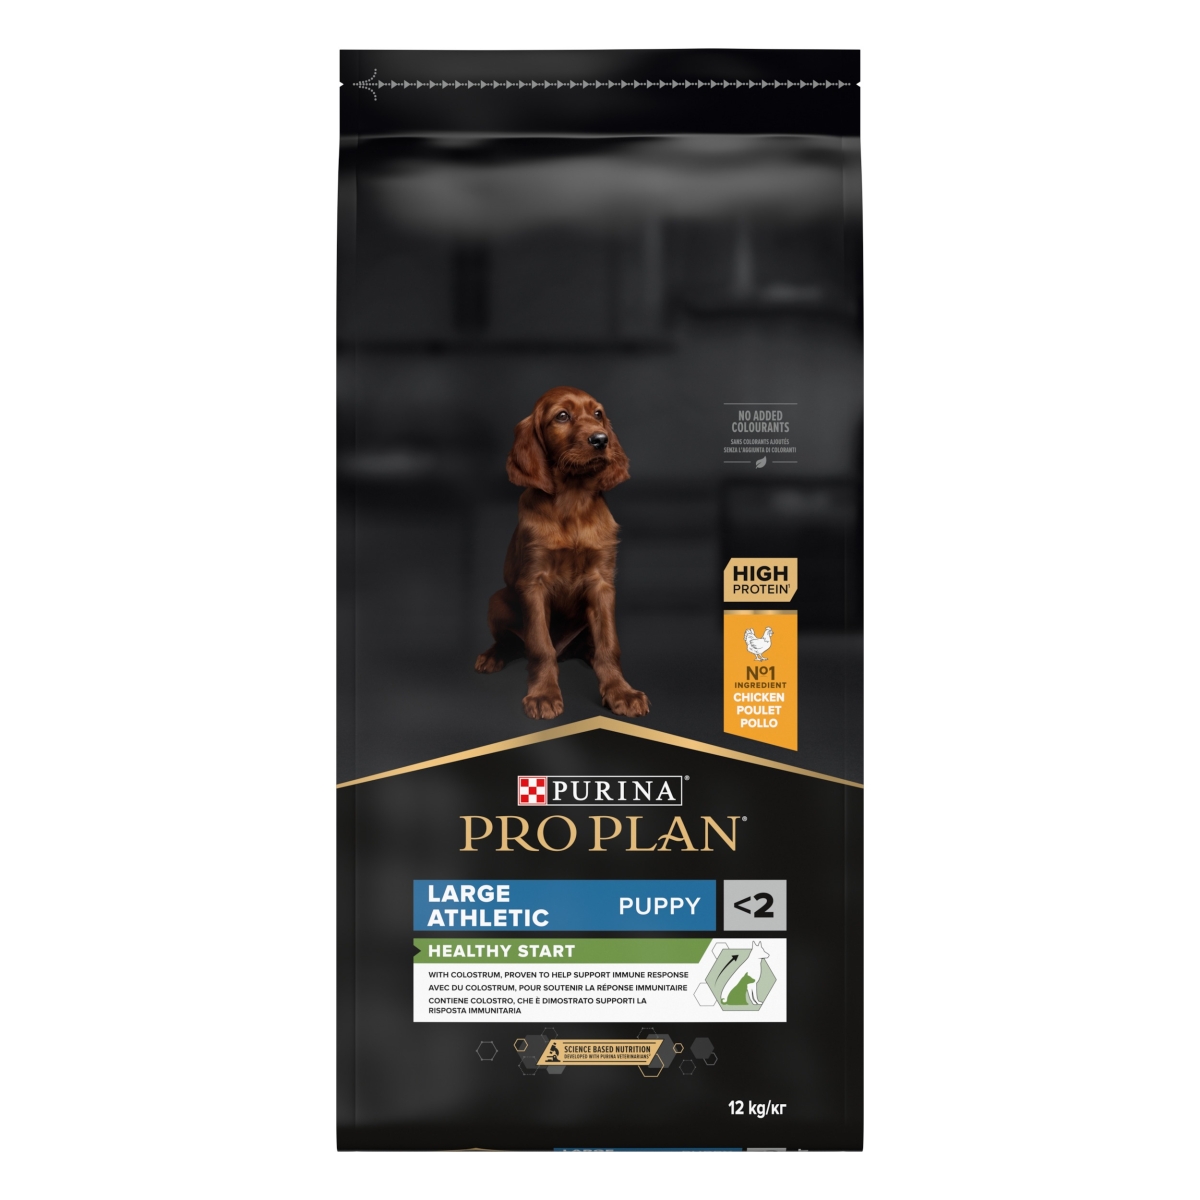 Purina PRO PLAN Large Athletic Puppy with OPTISTART®, 12 kg